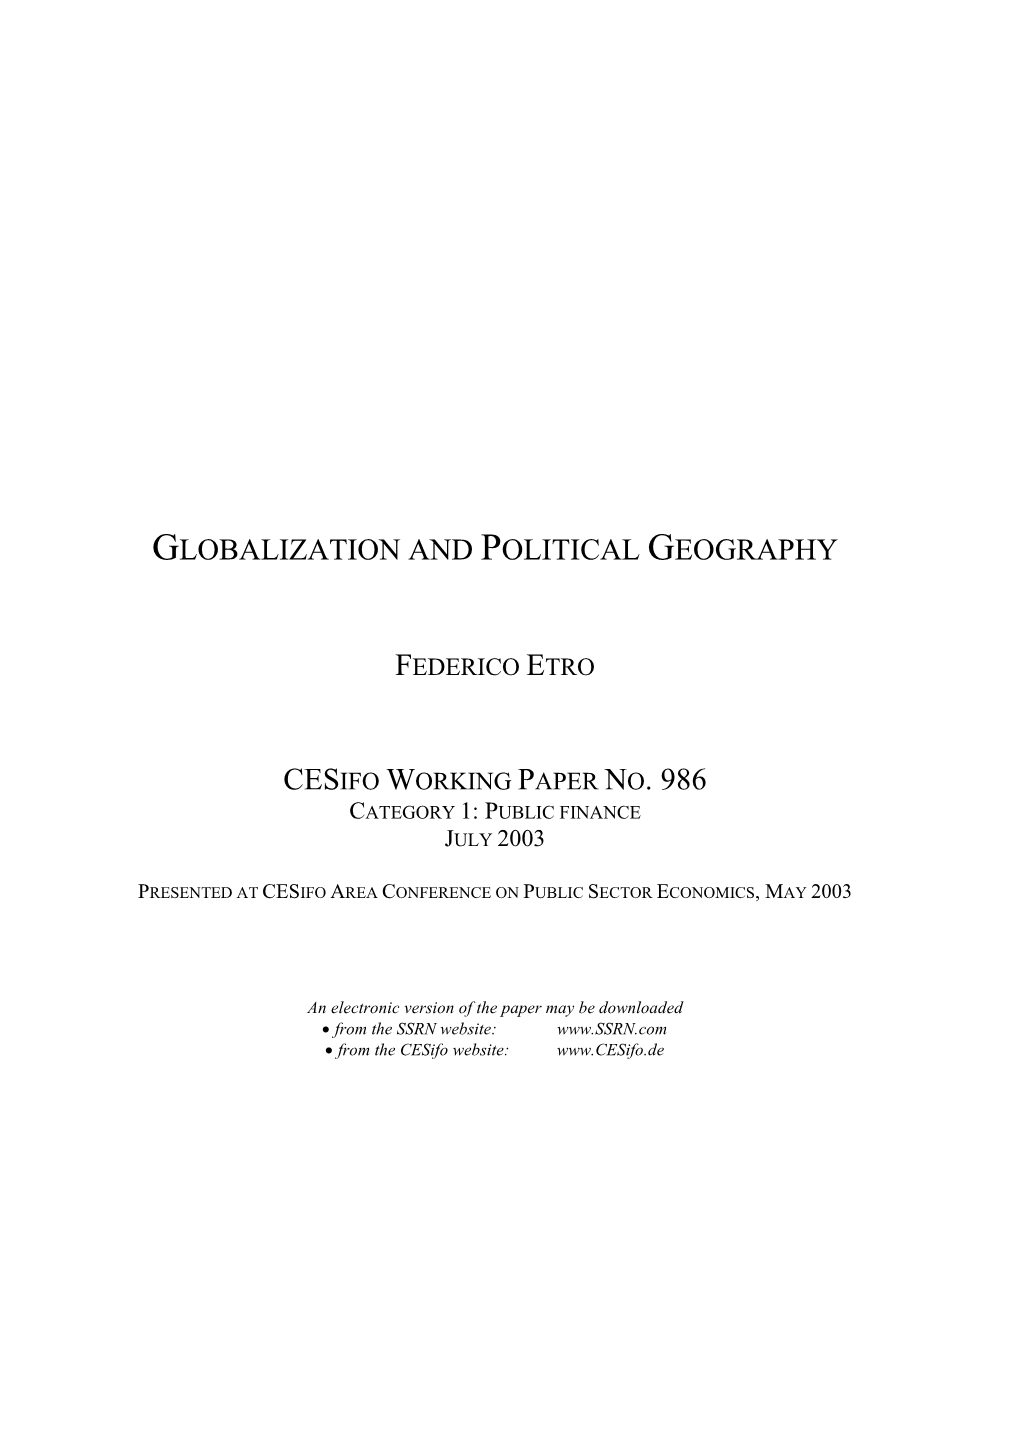 Globalization and Political Geography